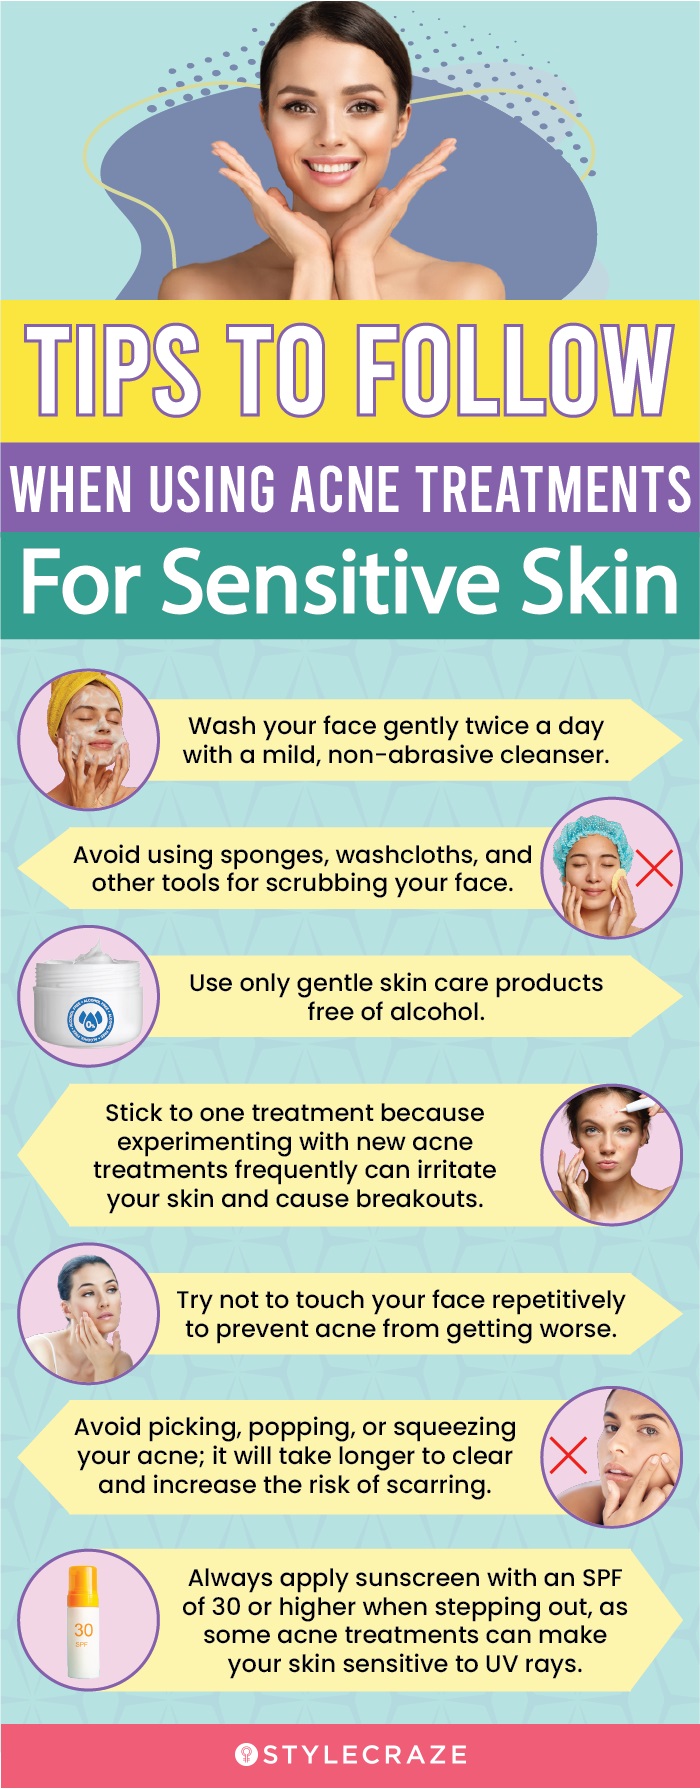 Tips To Follow When Using Acne Treatments For Sensitive Skin (infographic)